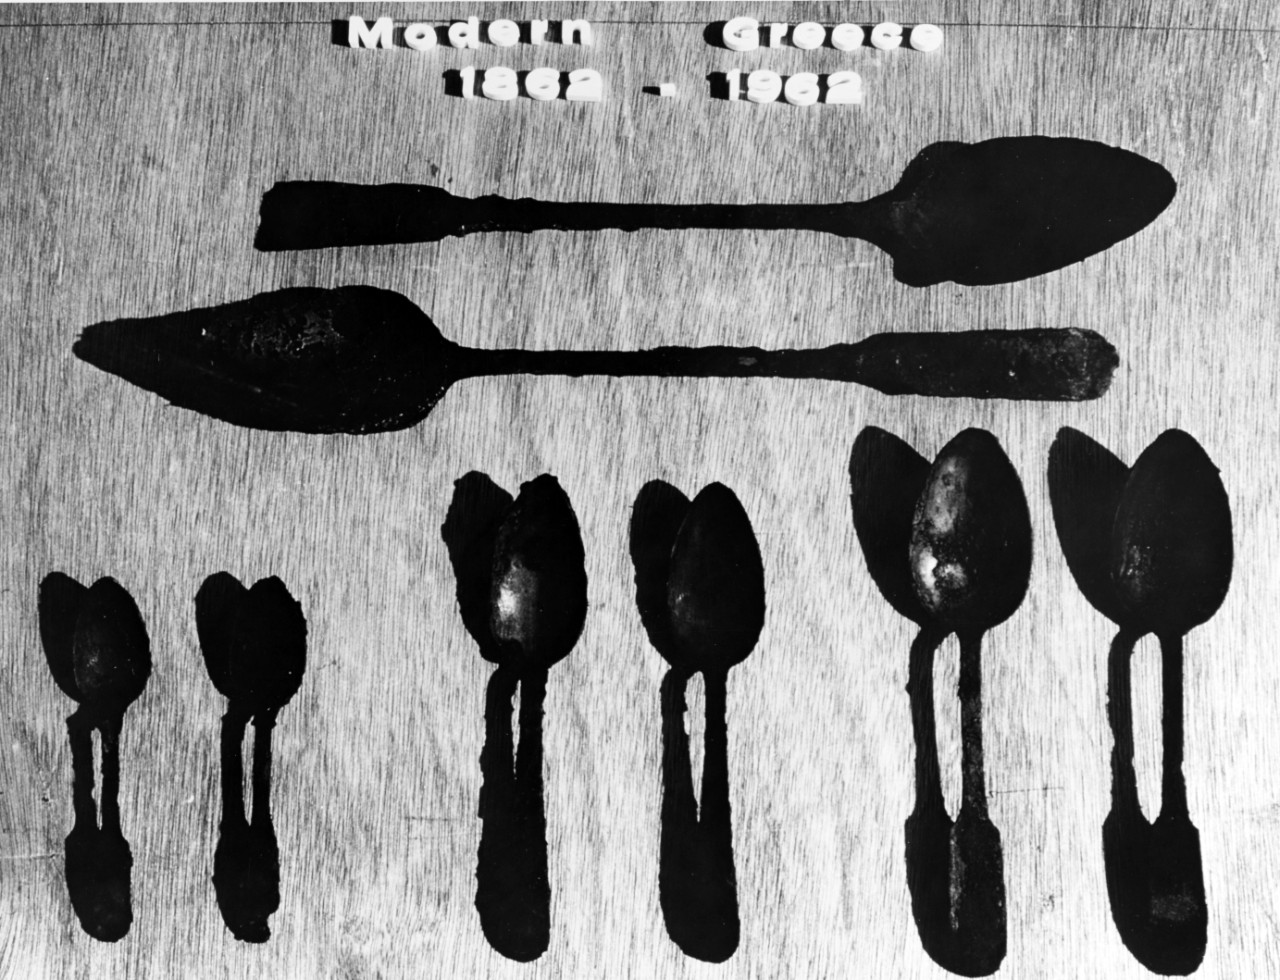 Spoons salvaged from the wreck of the blockade running steamer MODERN GREECE in 1962.